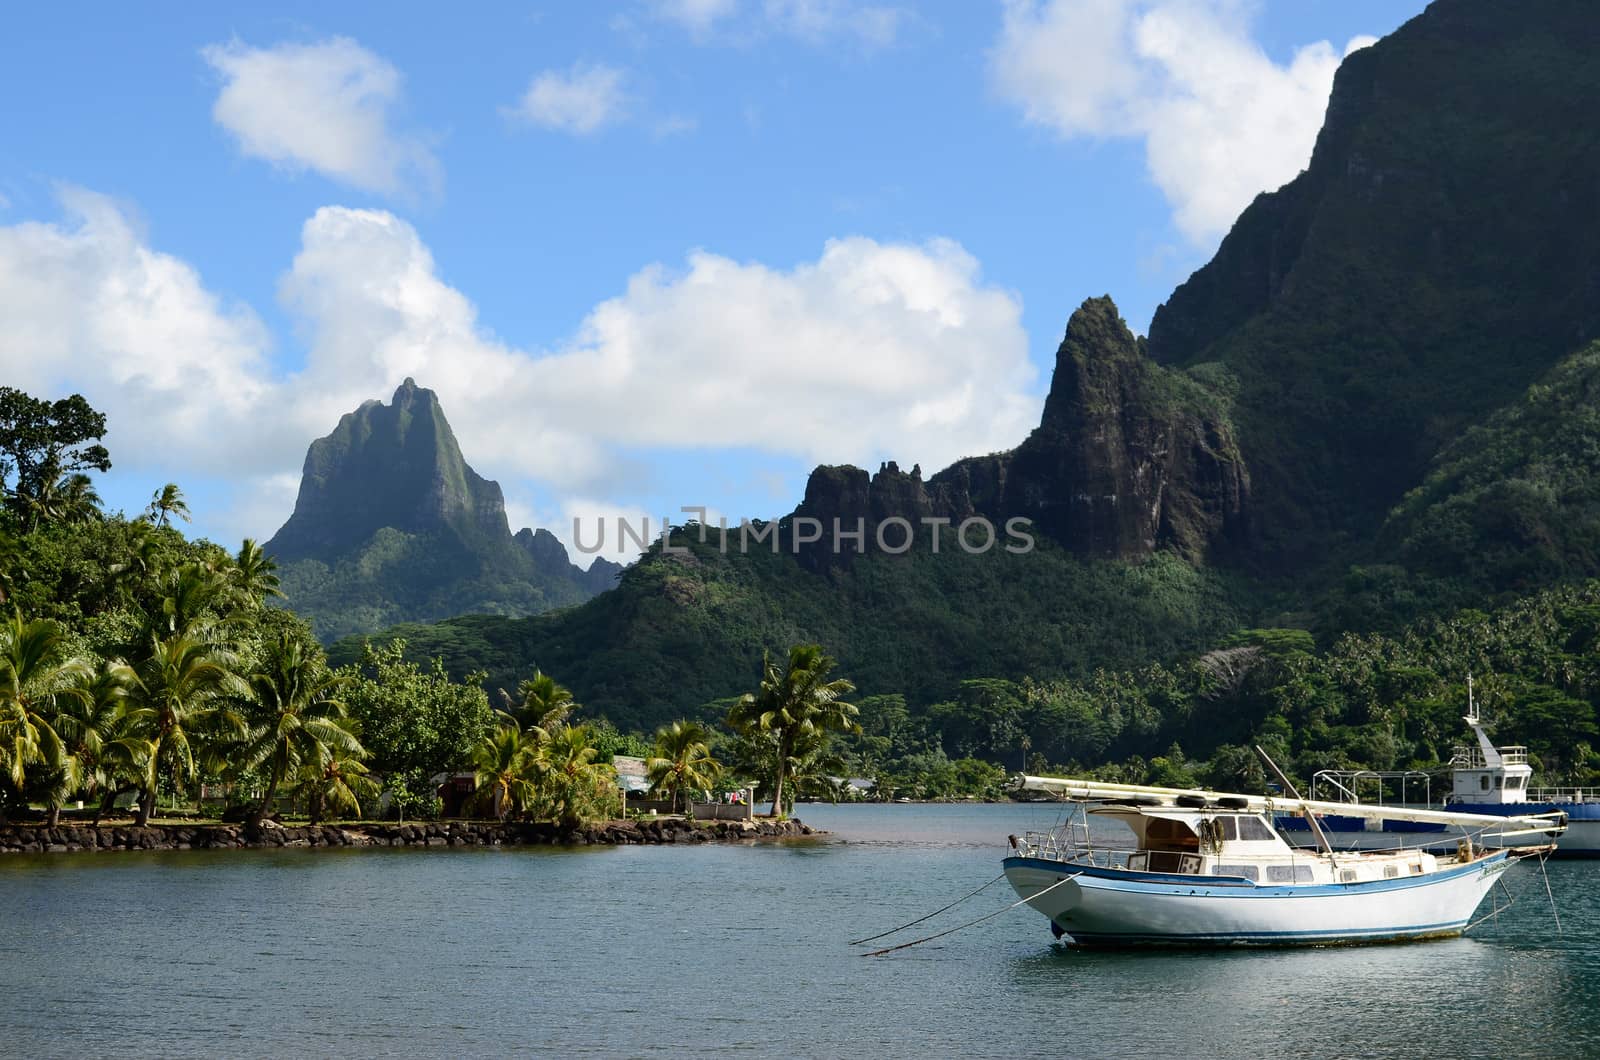 Boat in Cooks Bay with Moua Puta mountain in the background on the tropical pacific island of Moorea, near Tahiti in French Polynesia.